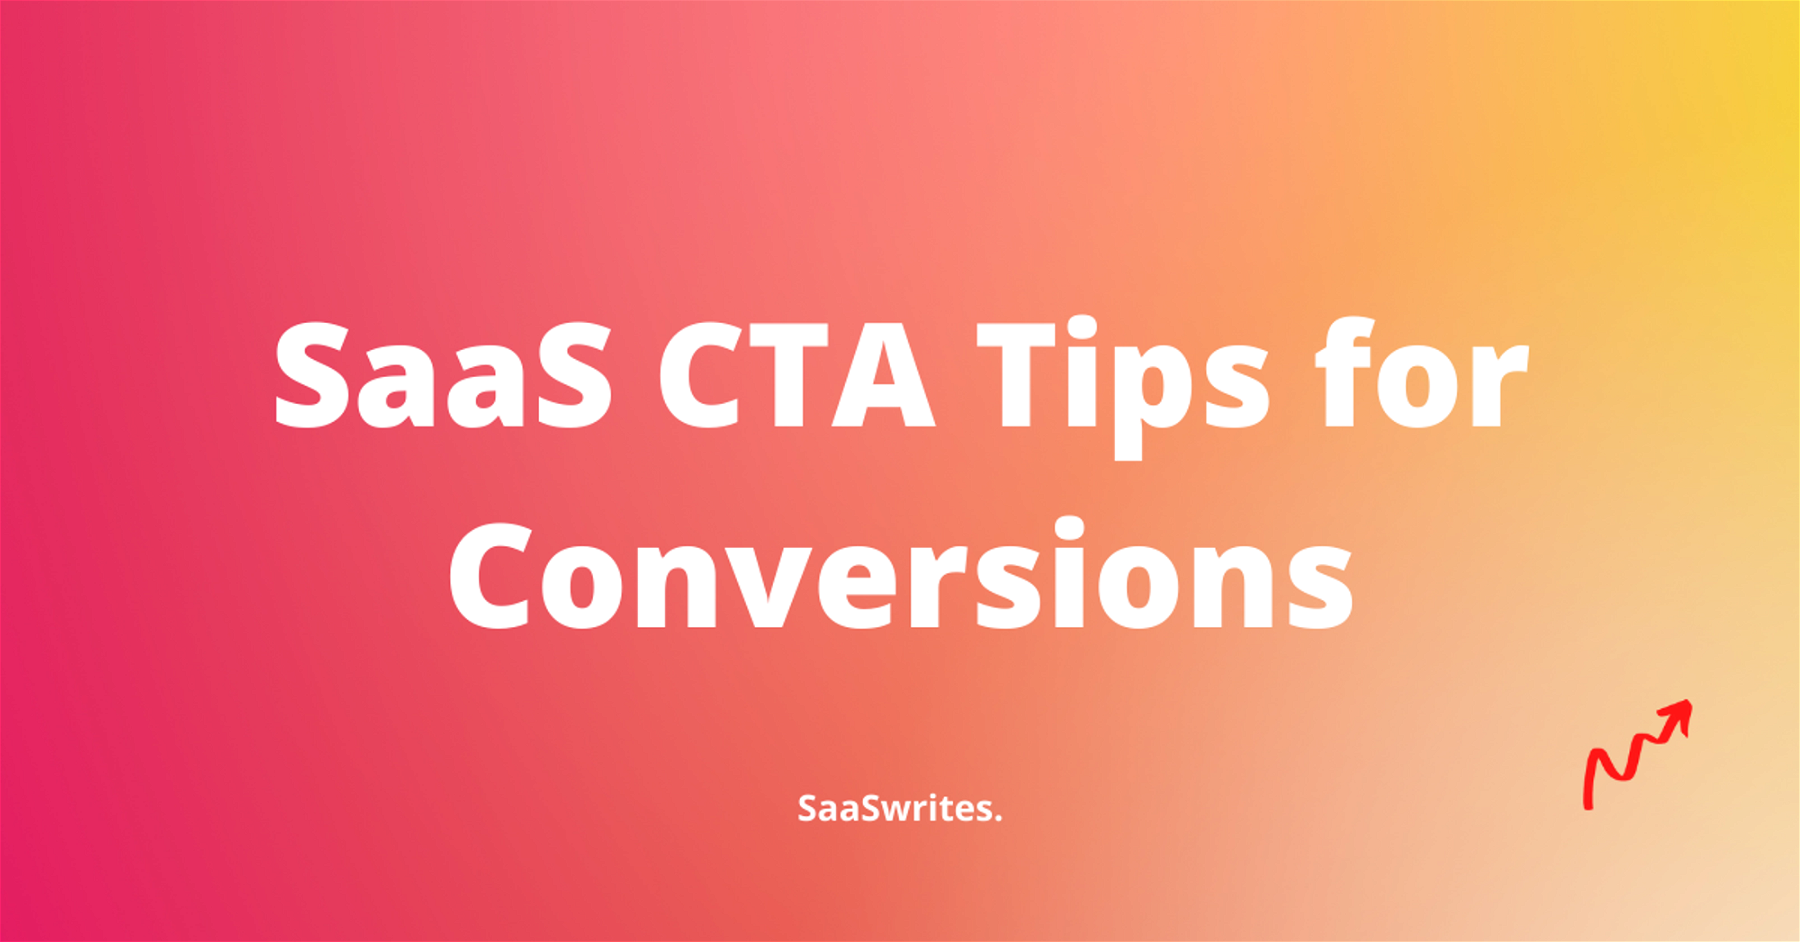 17 CTA Tips for SaaS from Experts to Guarantee your Conversion (2023)